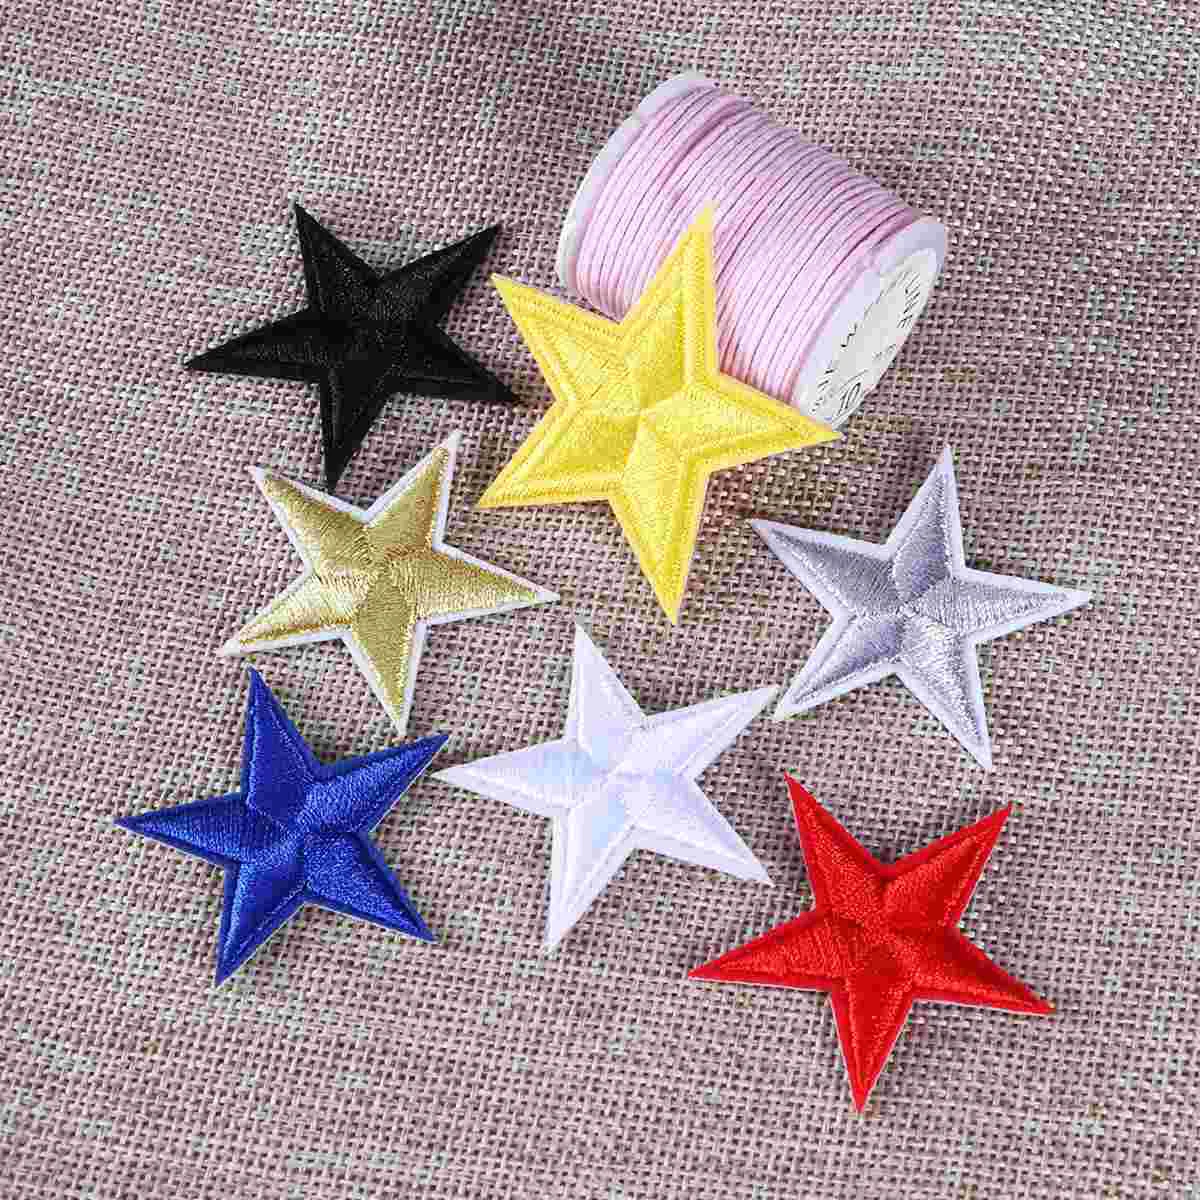 

Star Patches Patch Clothing Iron Applique Embroidery Sticker Stars Gold Sew Sewing Appliques Diy Clothes Embroidered Life